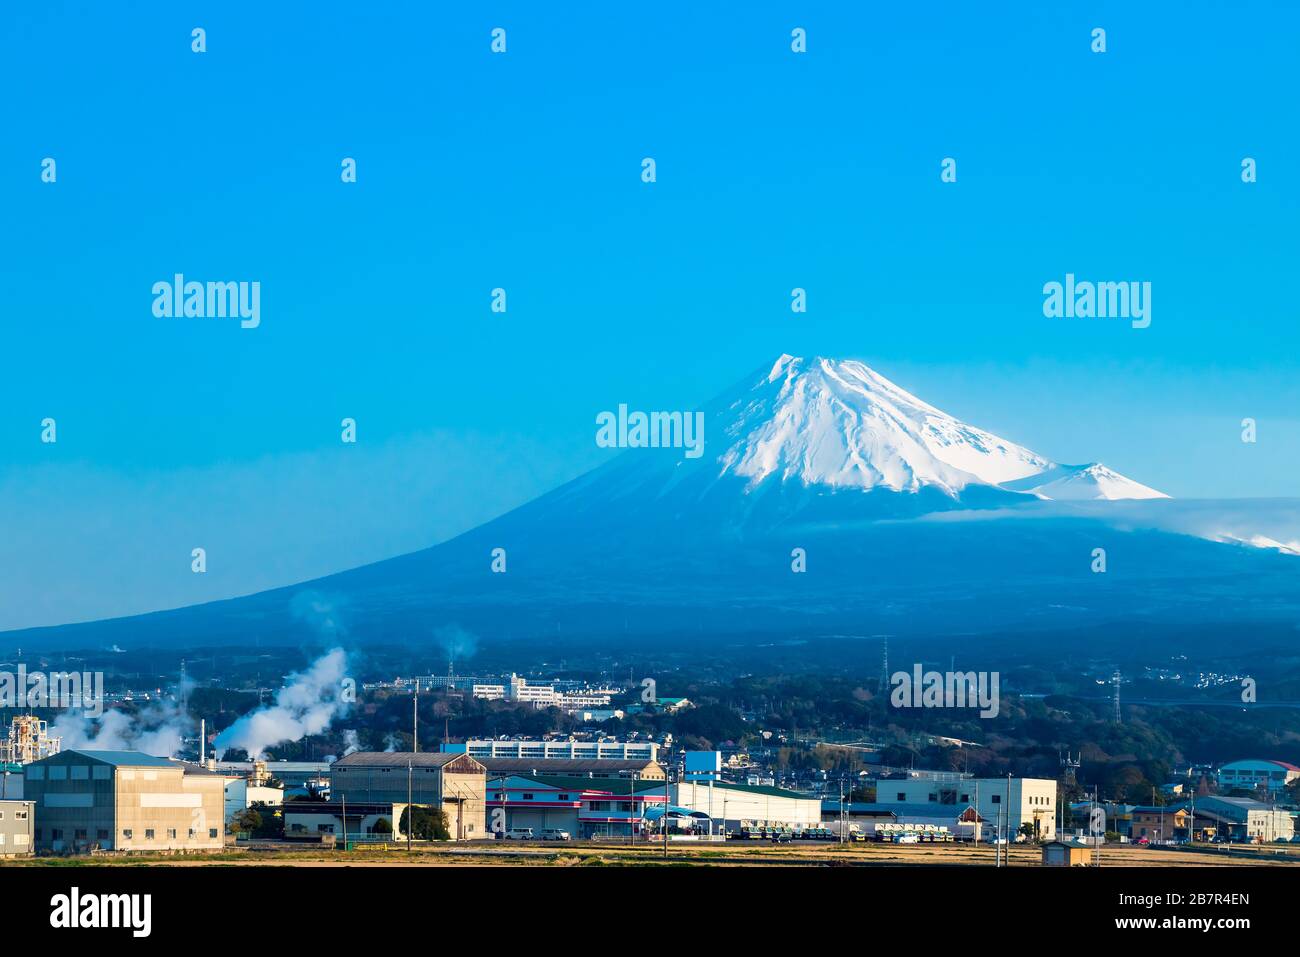 Mountain Fuji in Japan during day time with buildings in foreground, and with blue sky. Stock Photo